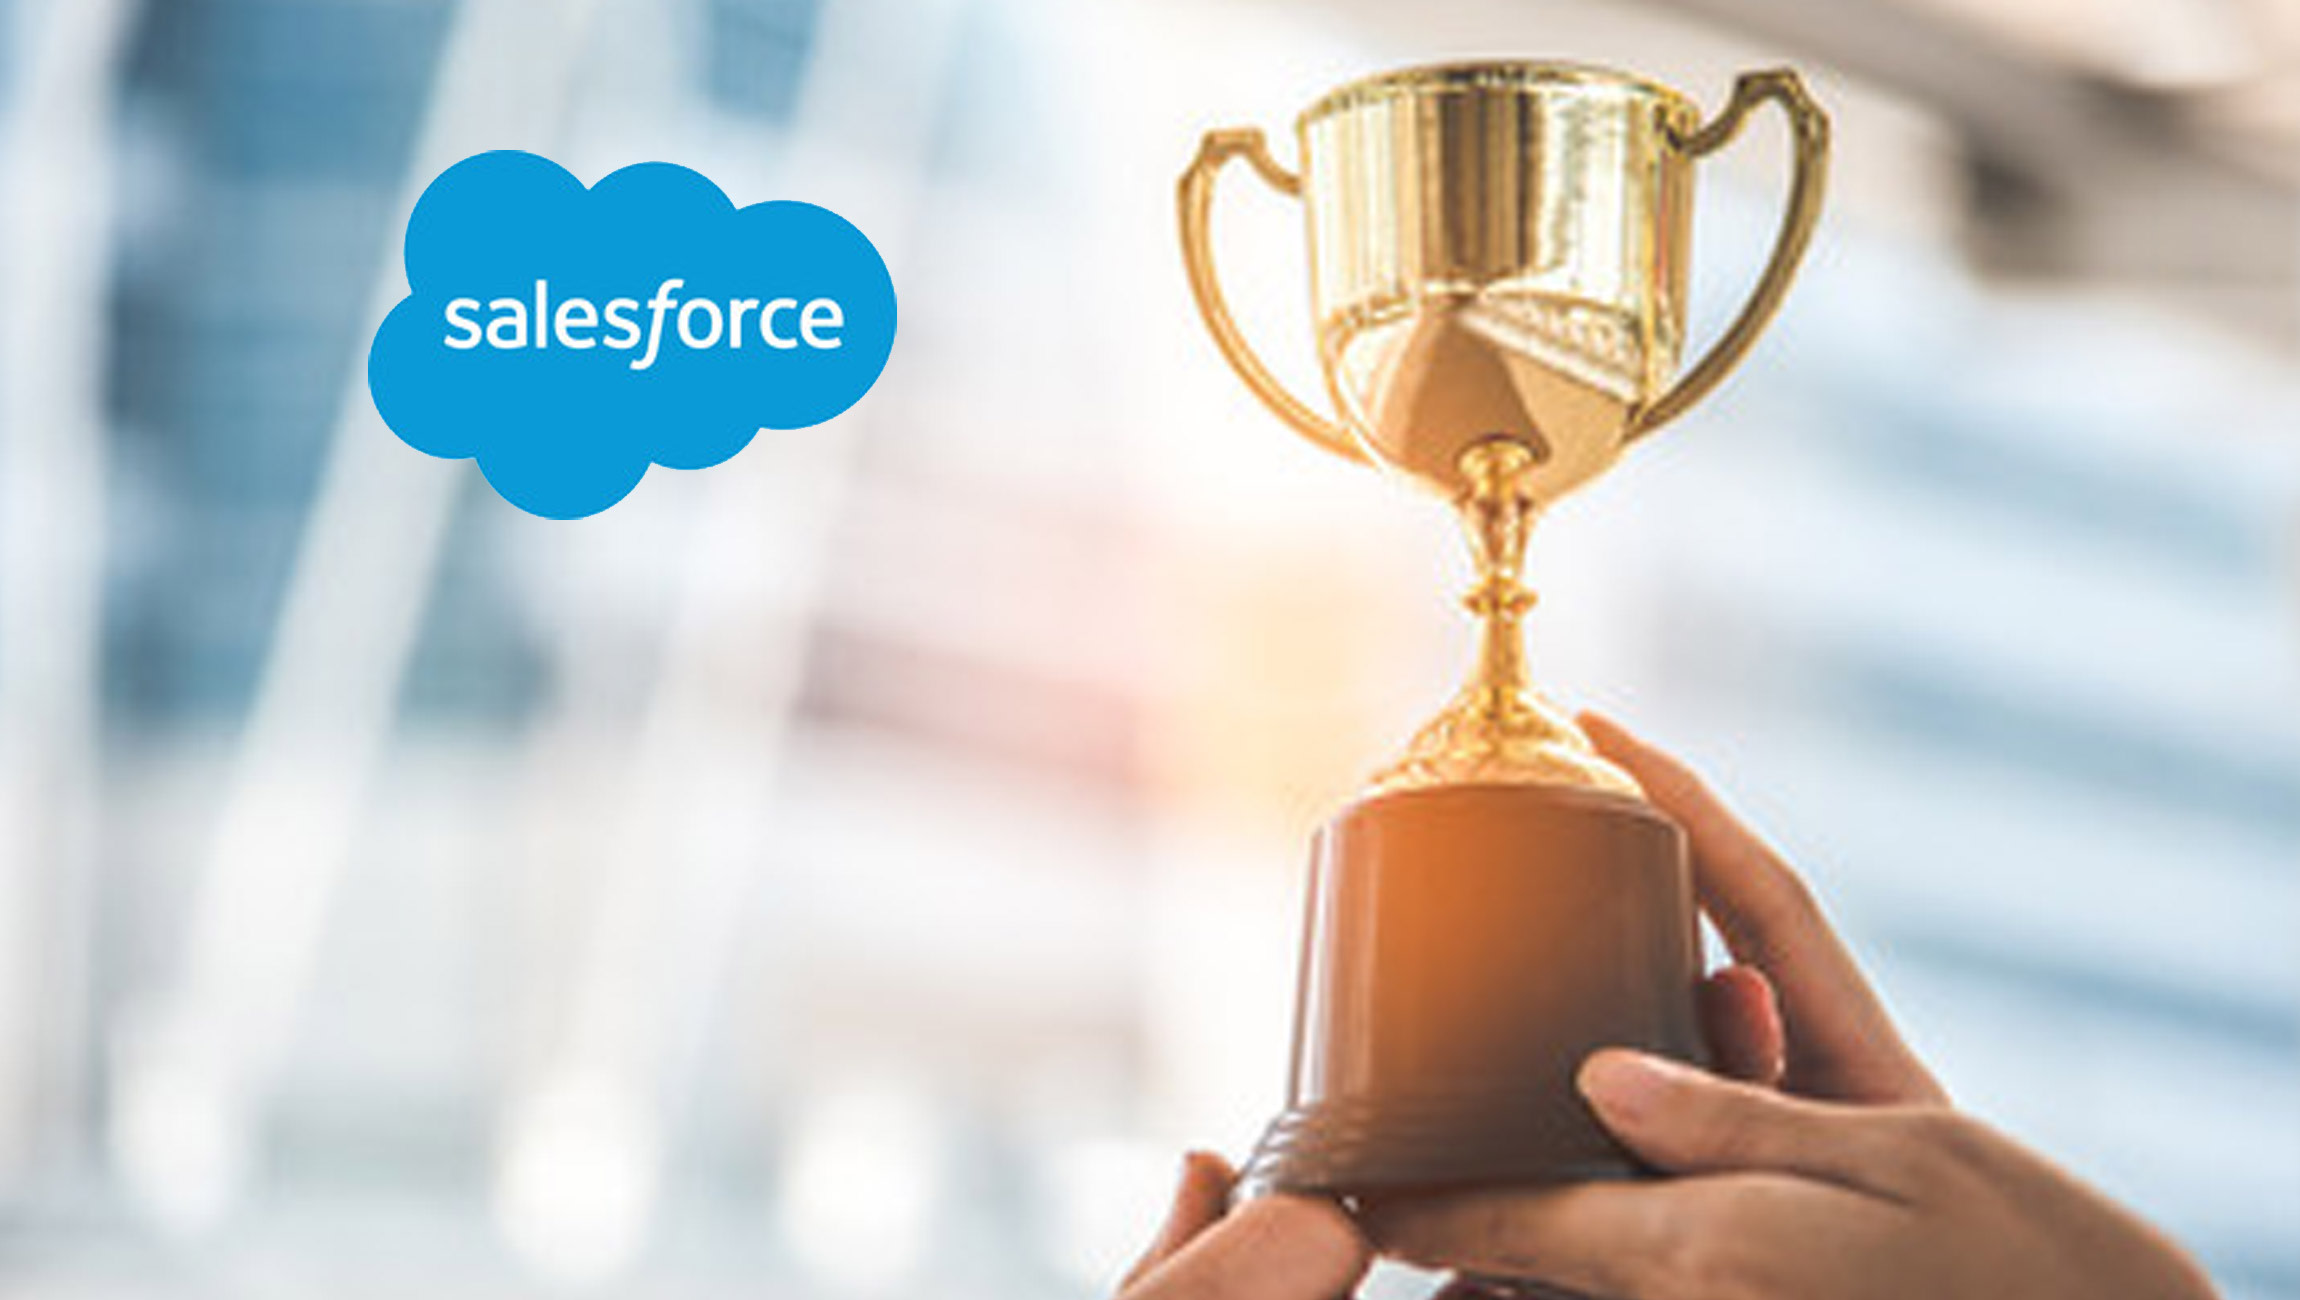 Salesforce's Inducement Equity Incentive Plan awards Phennecs employees equity